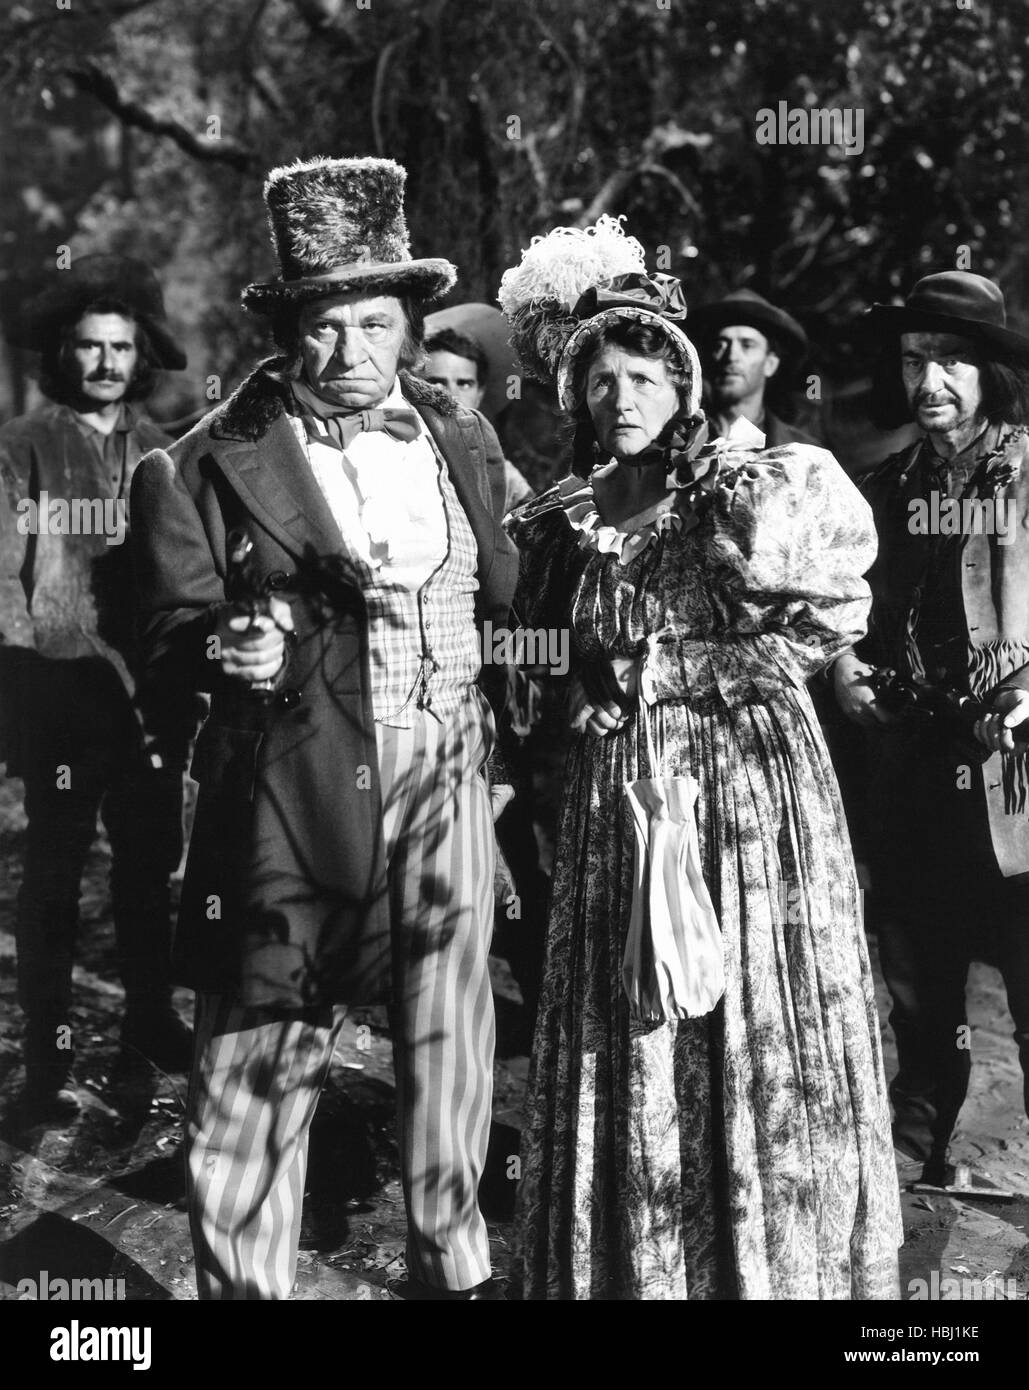 BIG JACK, from left: Wallace Beery, Marjorie Main, Syd Saylor, 1949 ...